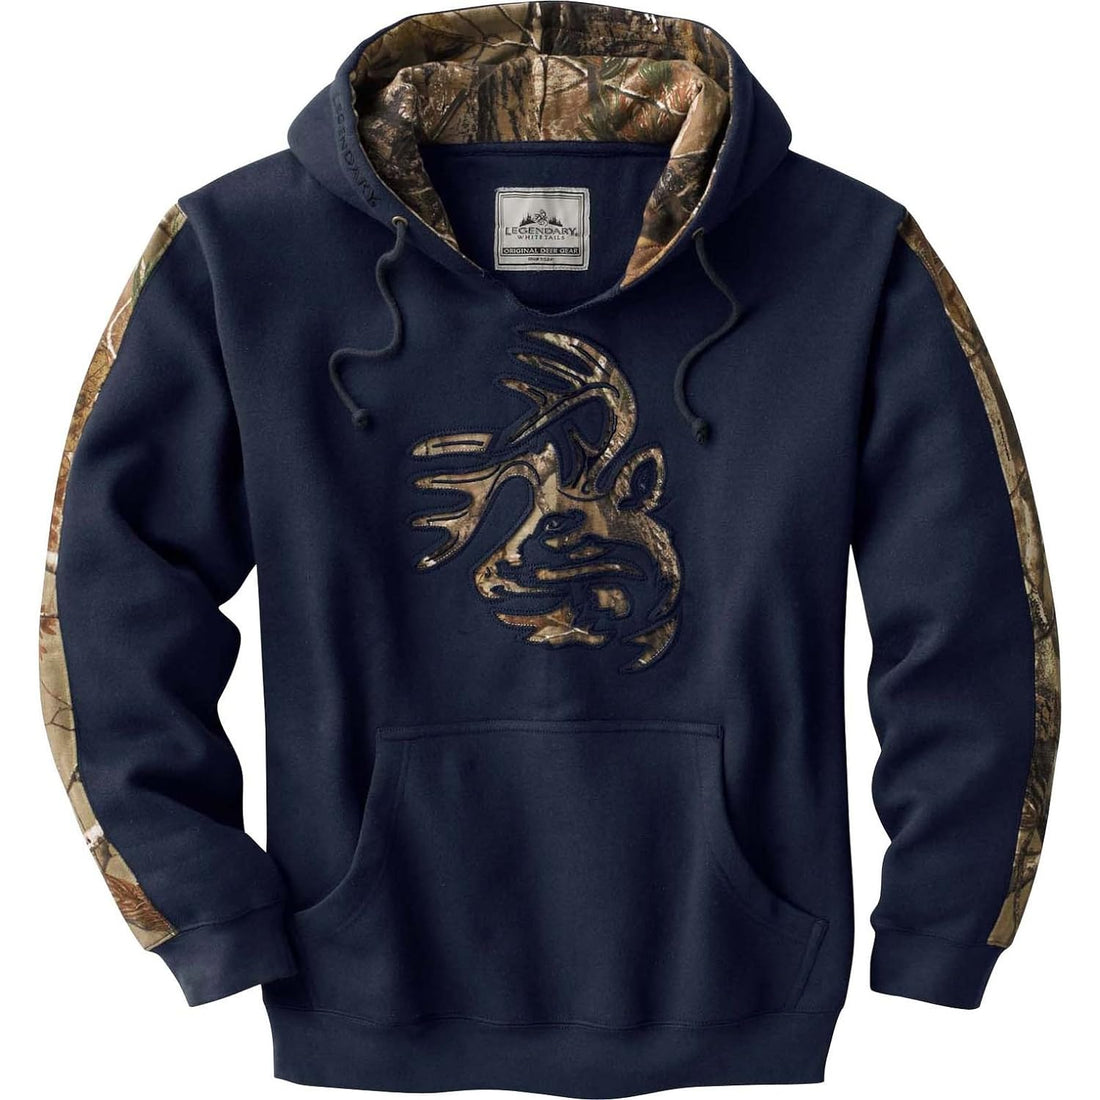 Legendary Whitetails Men's Camo Outfitter Hoodie, Navy, X-Large